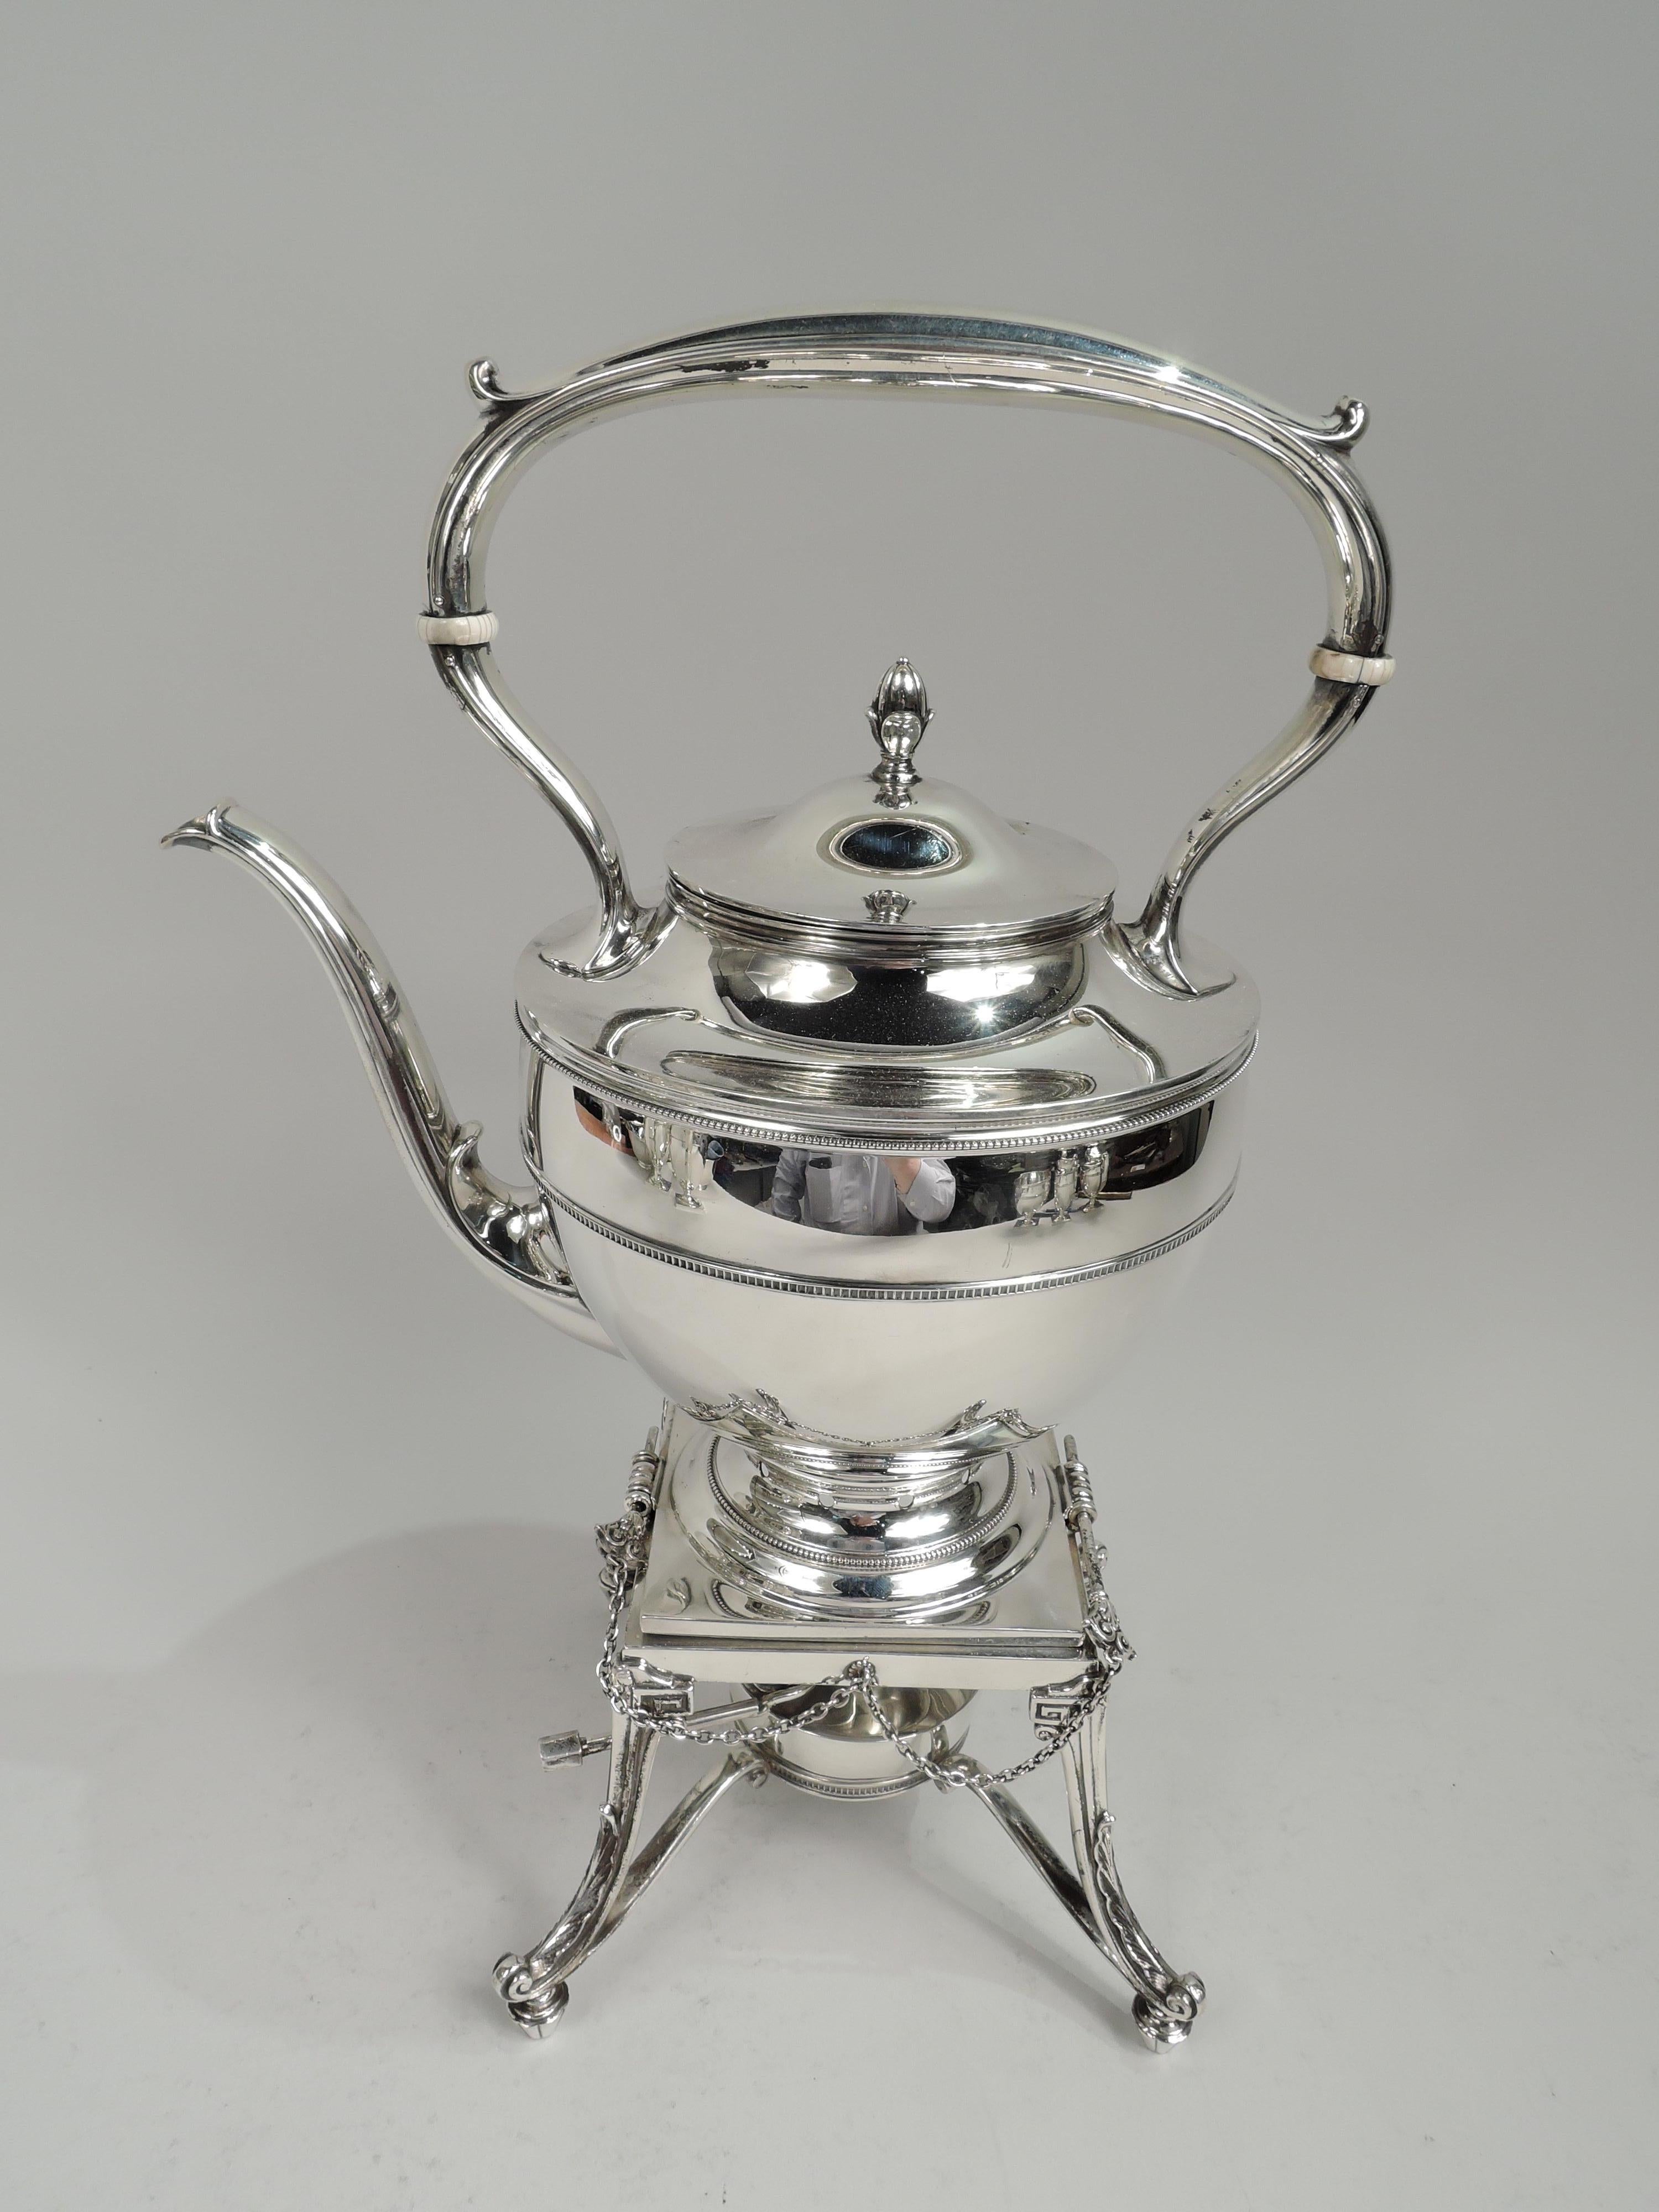 Modern Classical sterling silver 7-piece coffee and tea set, 1920-1. Retailed by Cartier in New York. This set comprises hot water kettle on stand, coffeepot, teapot, creamer, sugar, waste bowl, and tray.

Each: Oval or round body on round foot